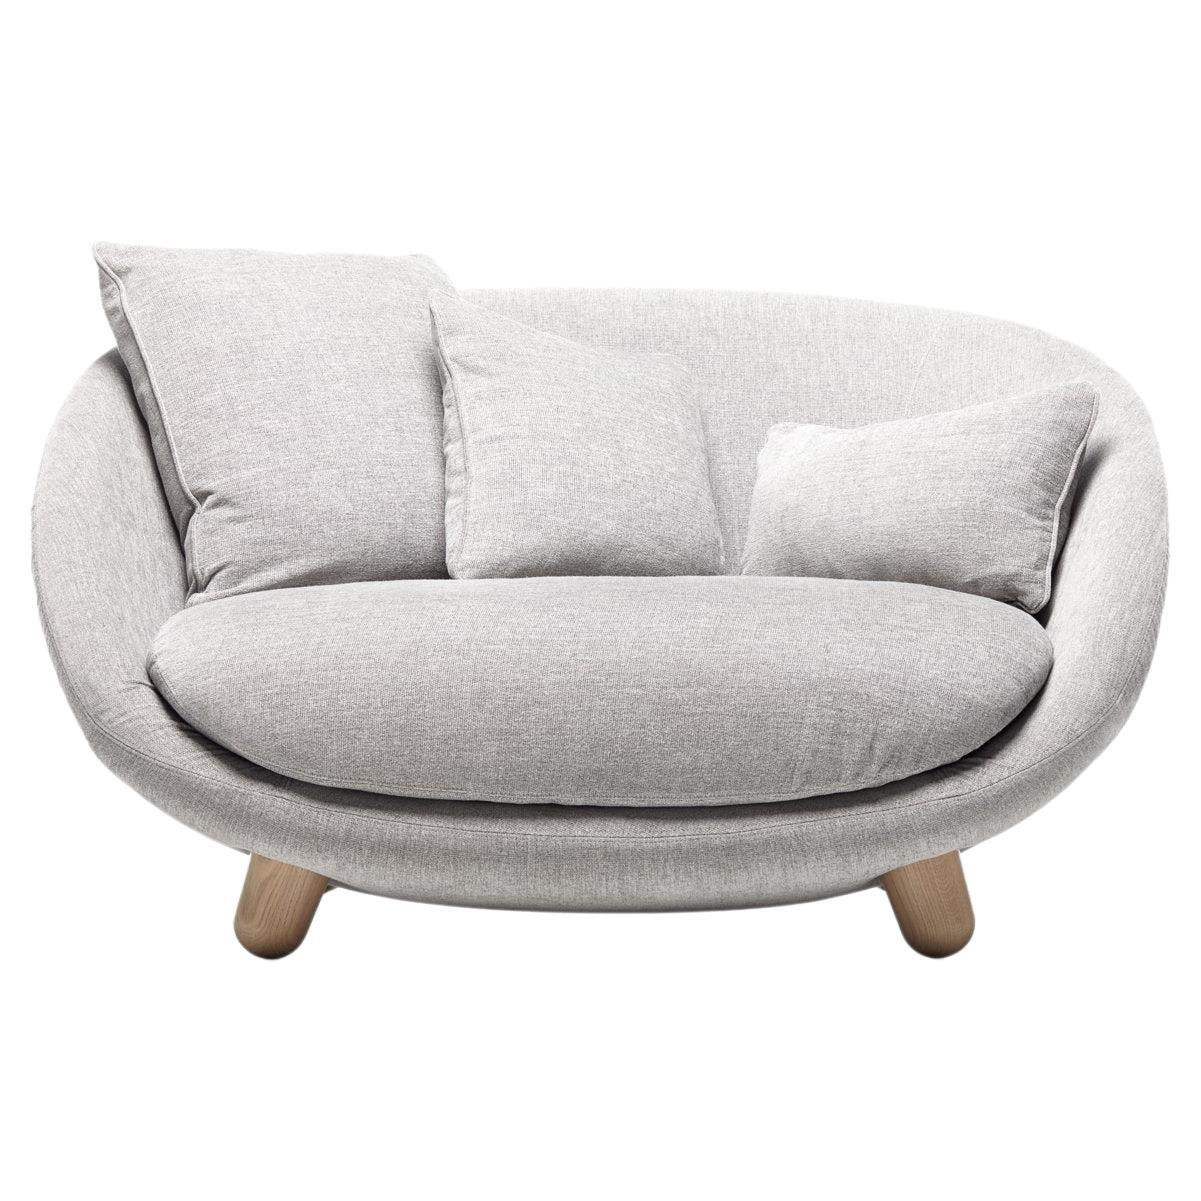 Moooi Love Sofa in Liscio, Nebbia Upholstery & White Wash Stained Legs